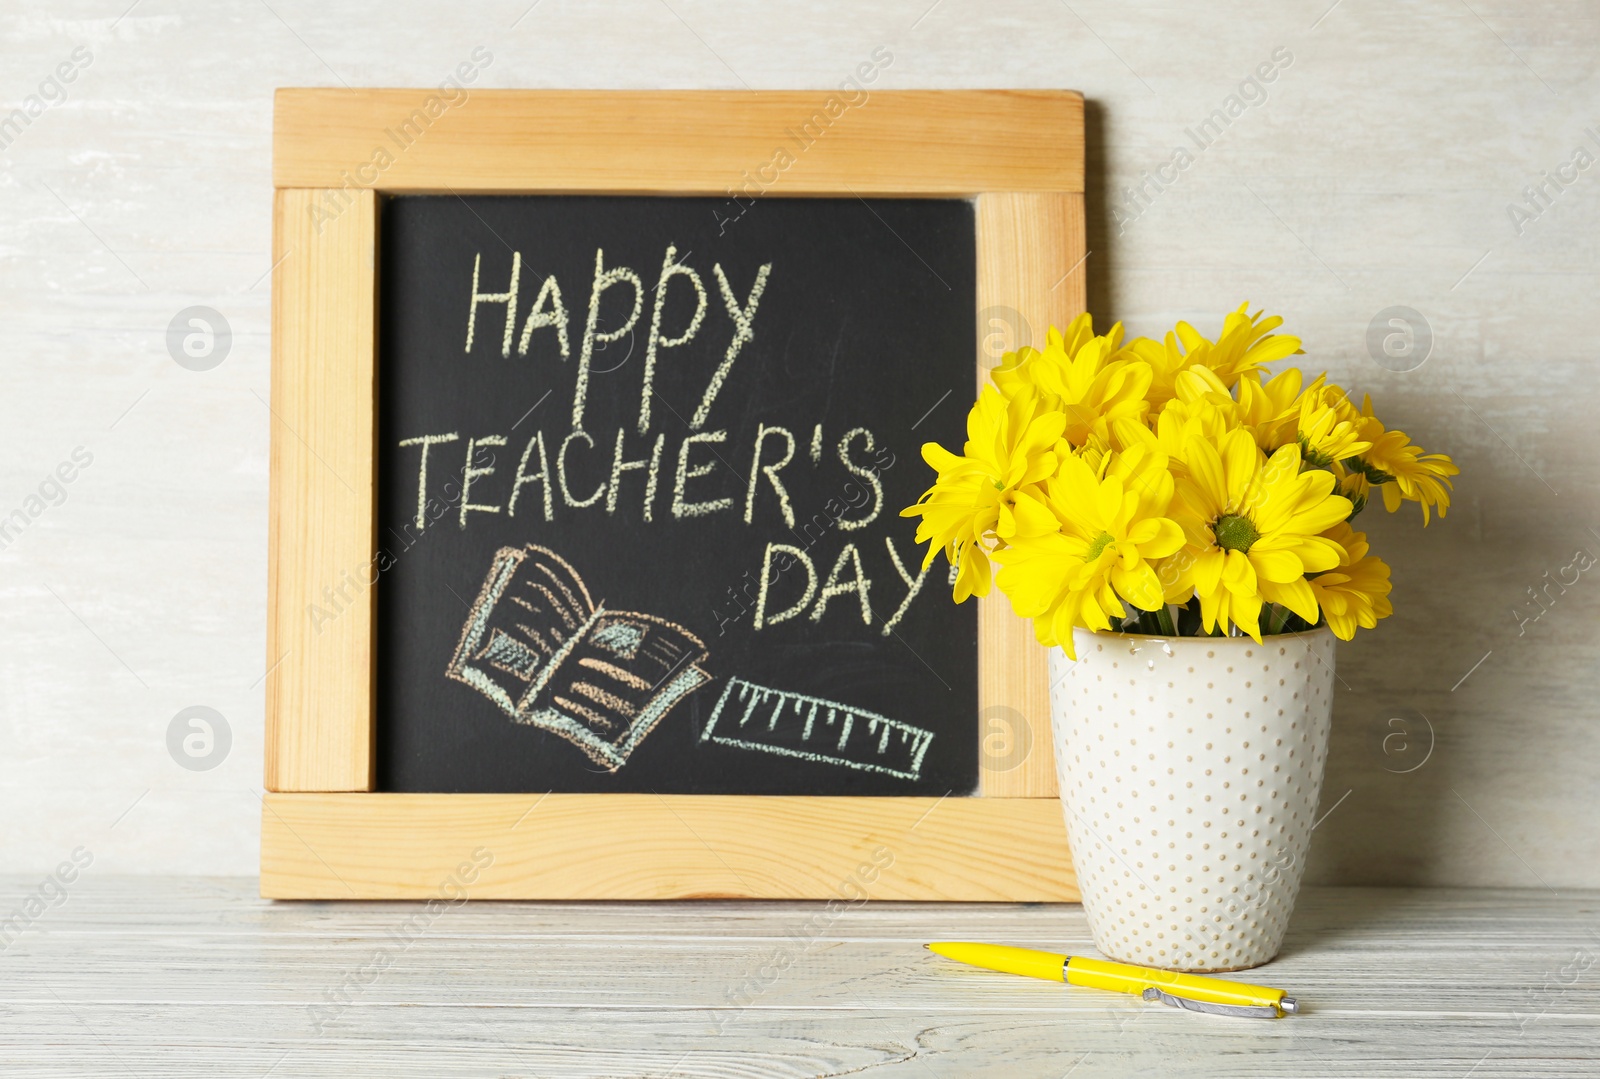 Photo of Chalkboard with inscription HAPPY TEACHER'S DAY and vase of flowers on wooden table against light wall